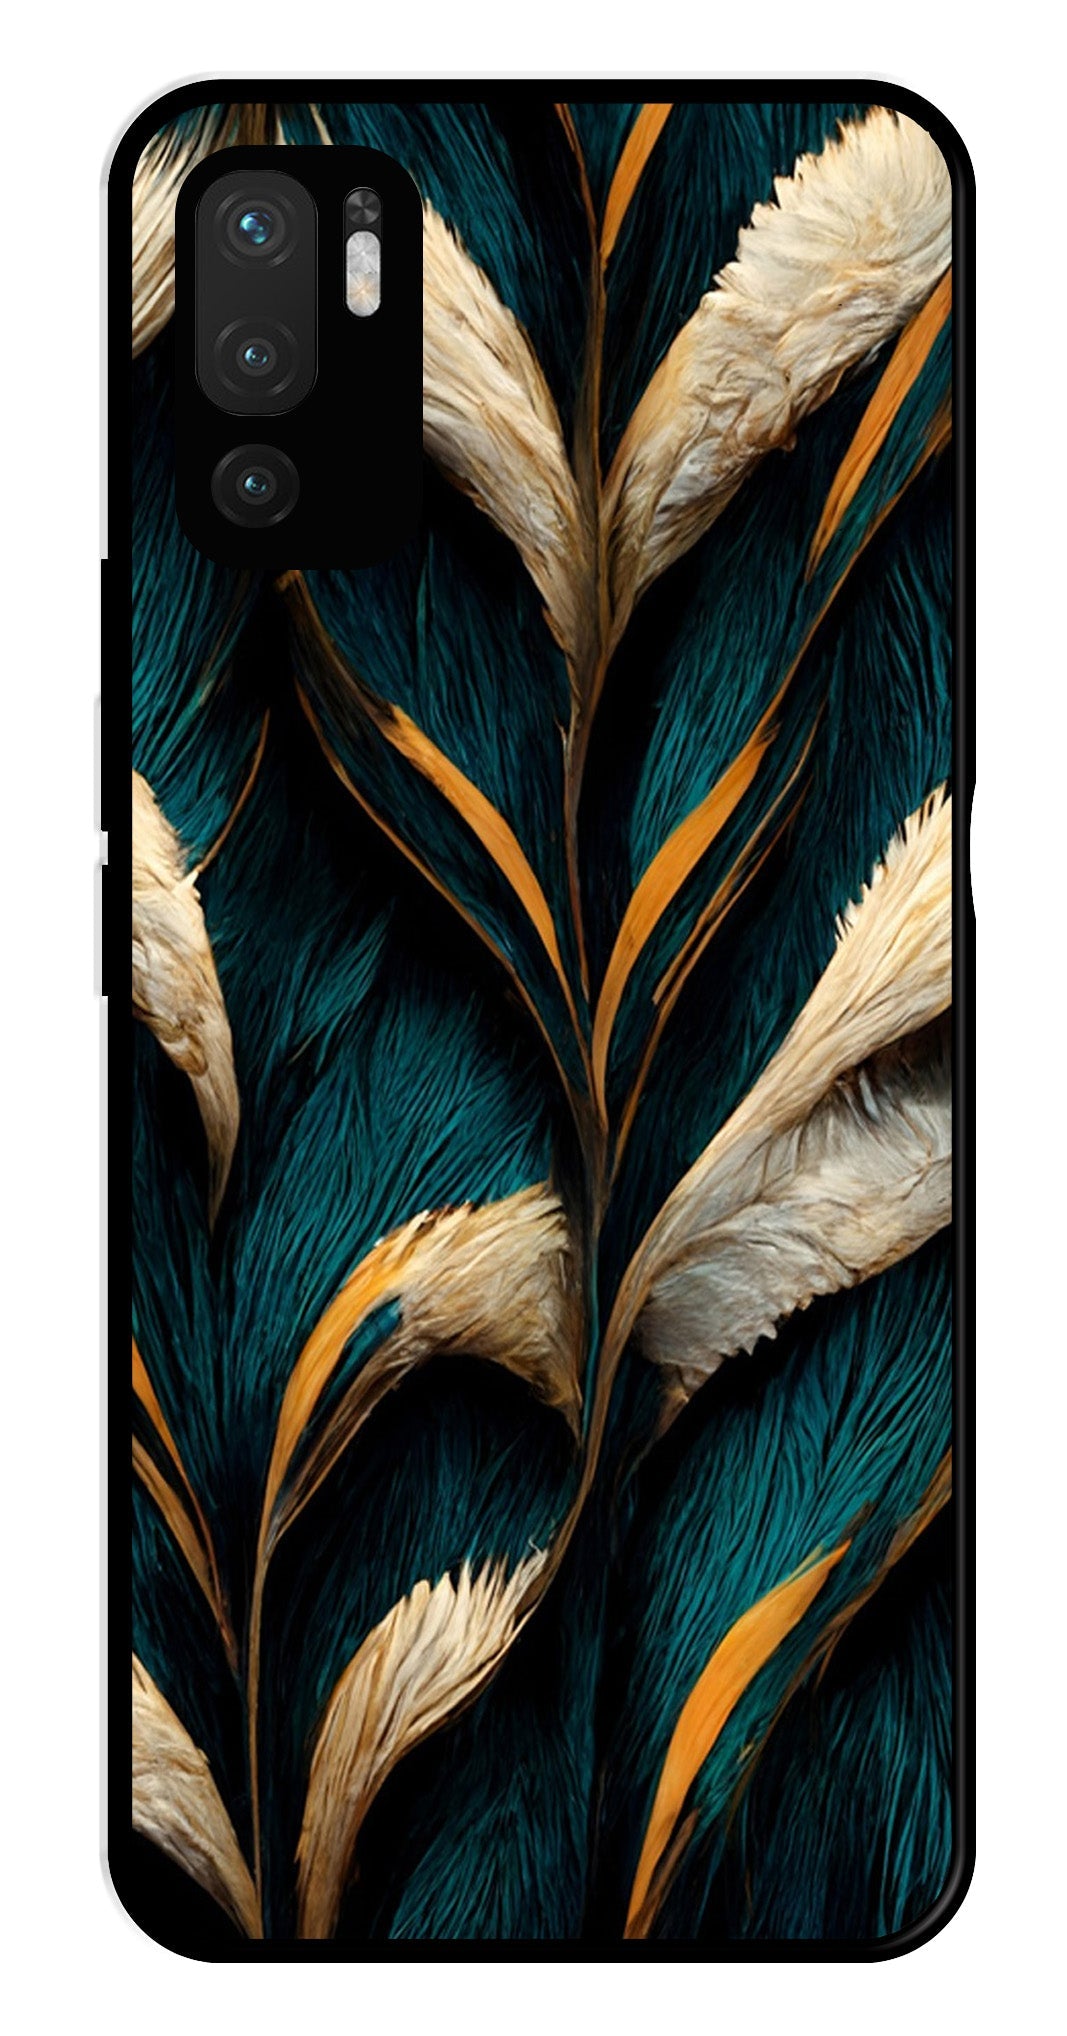 Feathers Metal Mobile Case for Redmi Note 10 5G   (Design No -30)